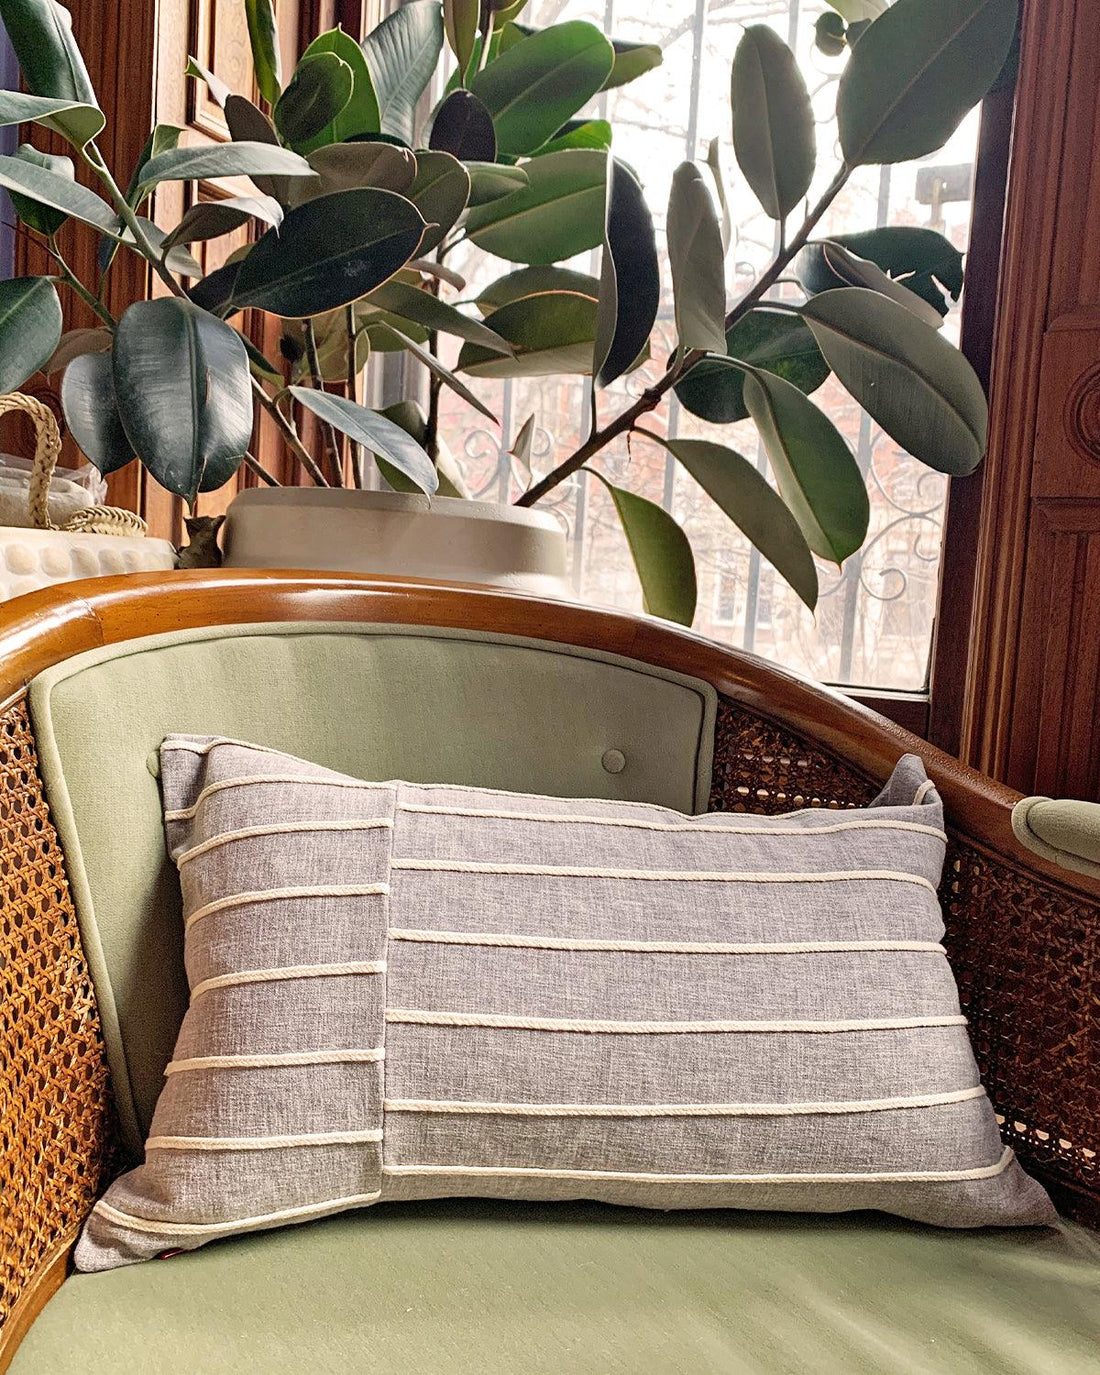 grey lumbar pillow with cream stripes on top of green wicker chair with plants in background